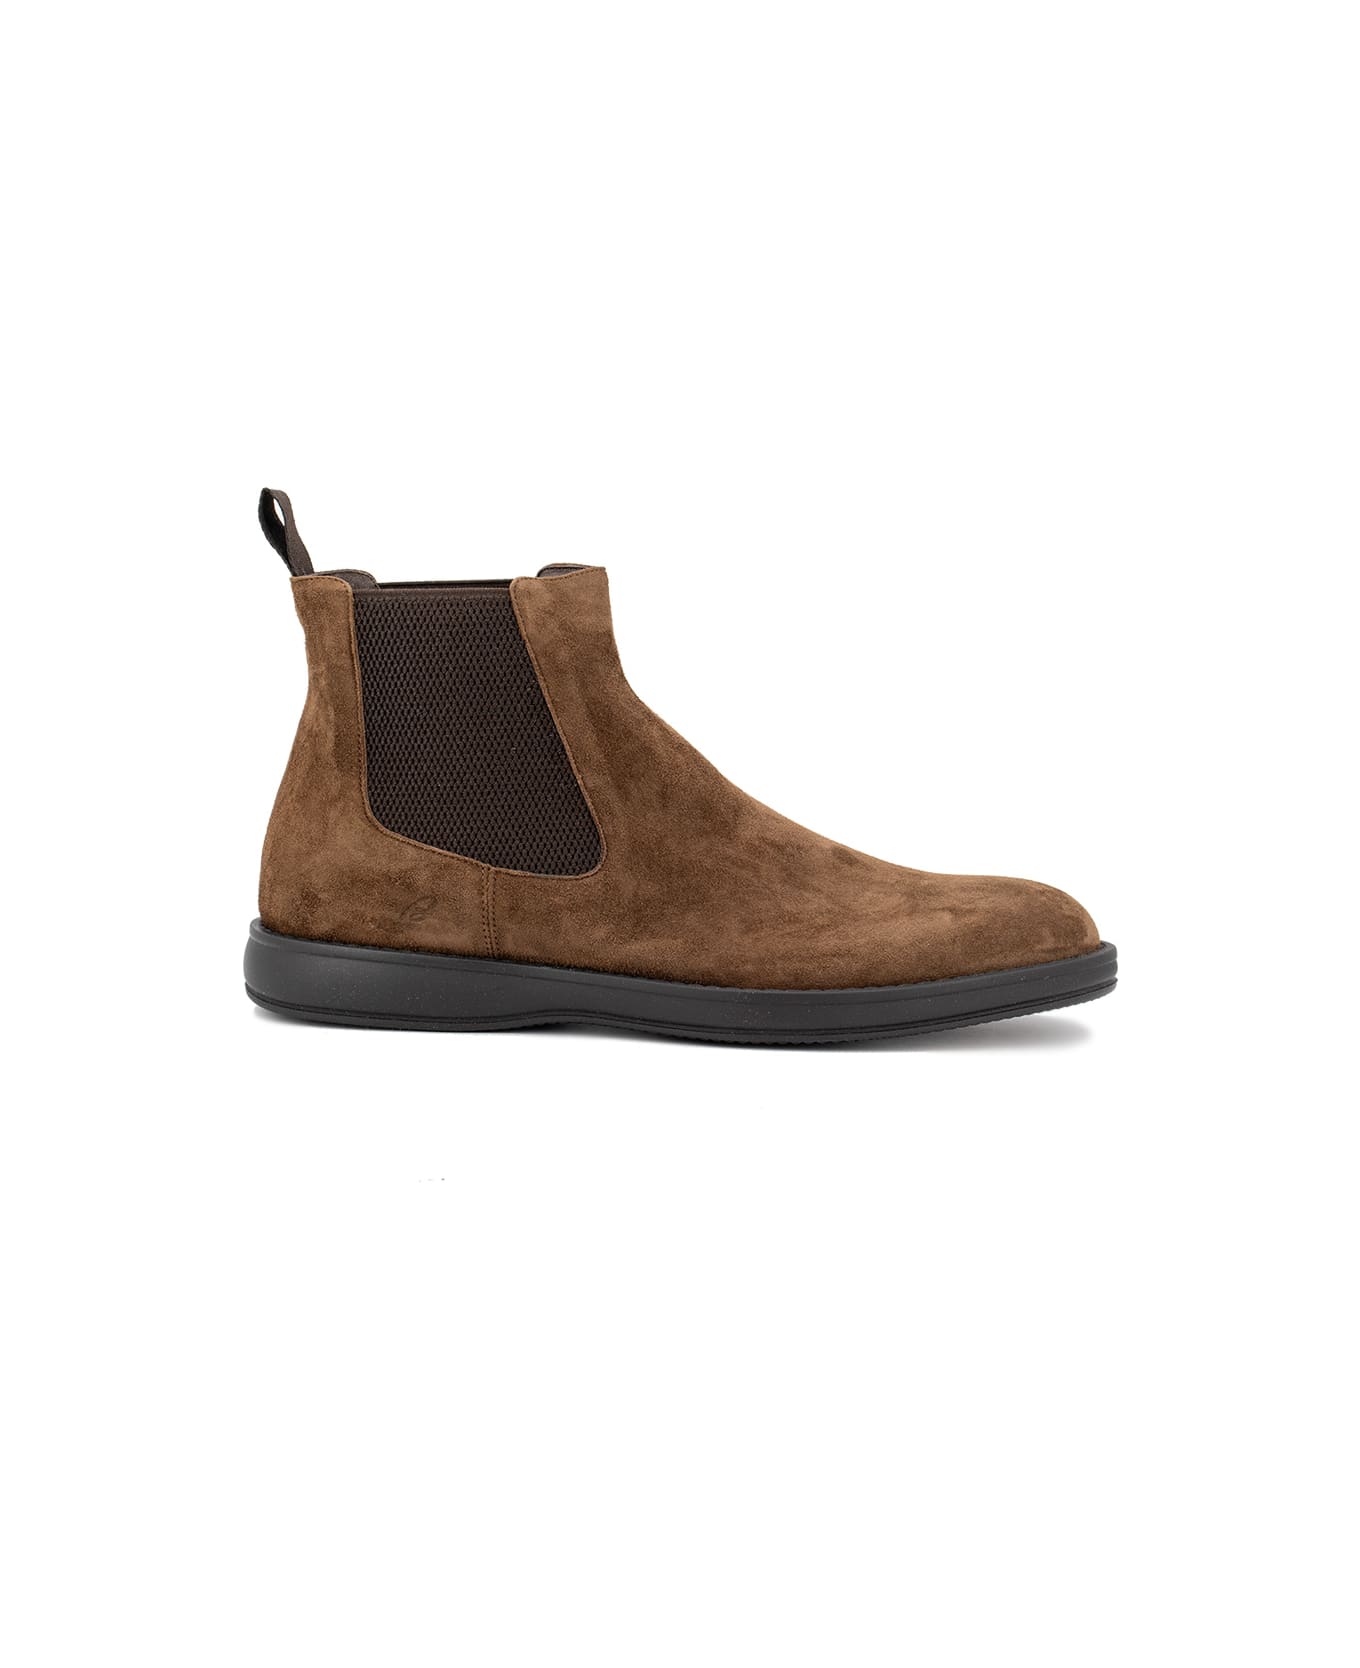 Brioni Ankle Boots - BROWN